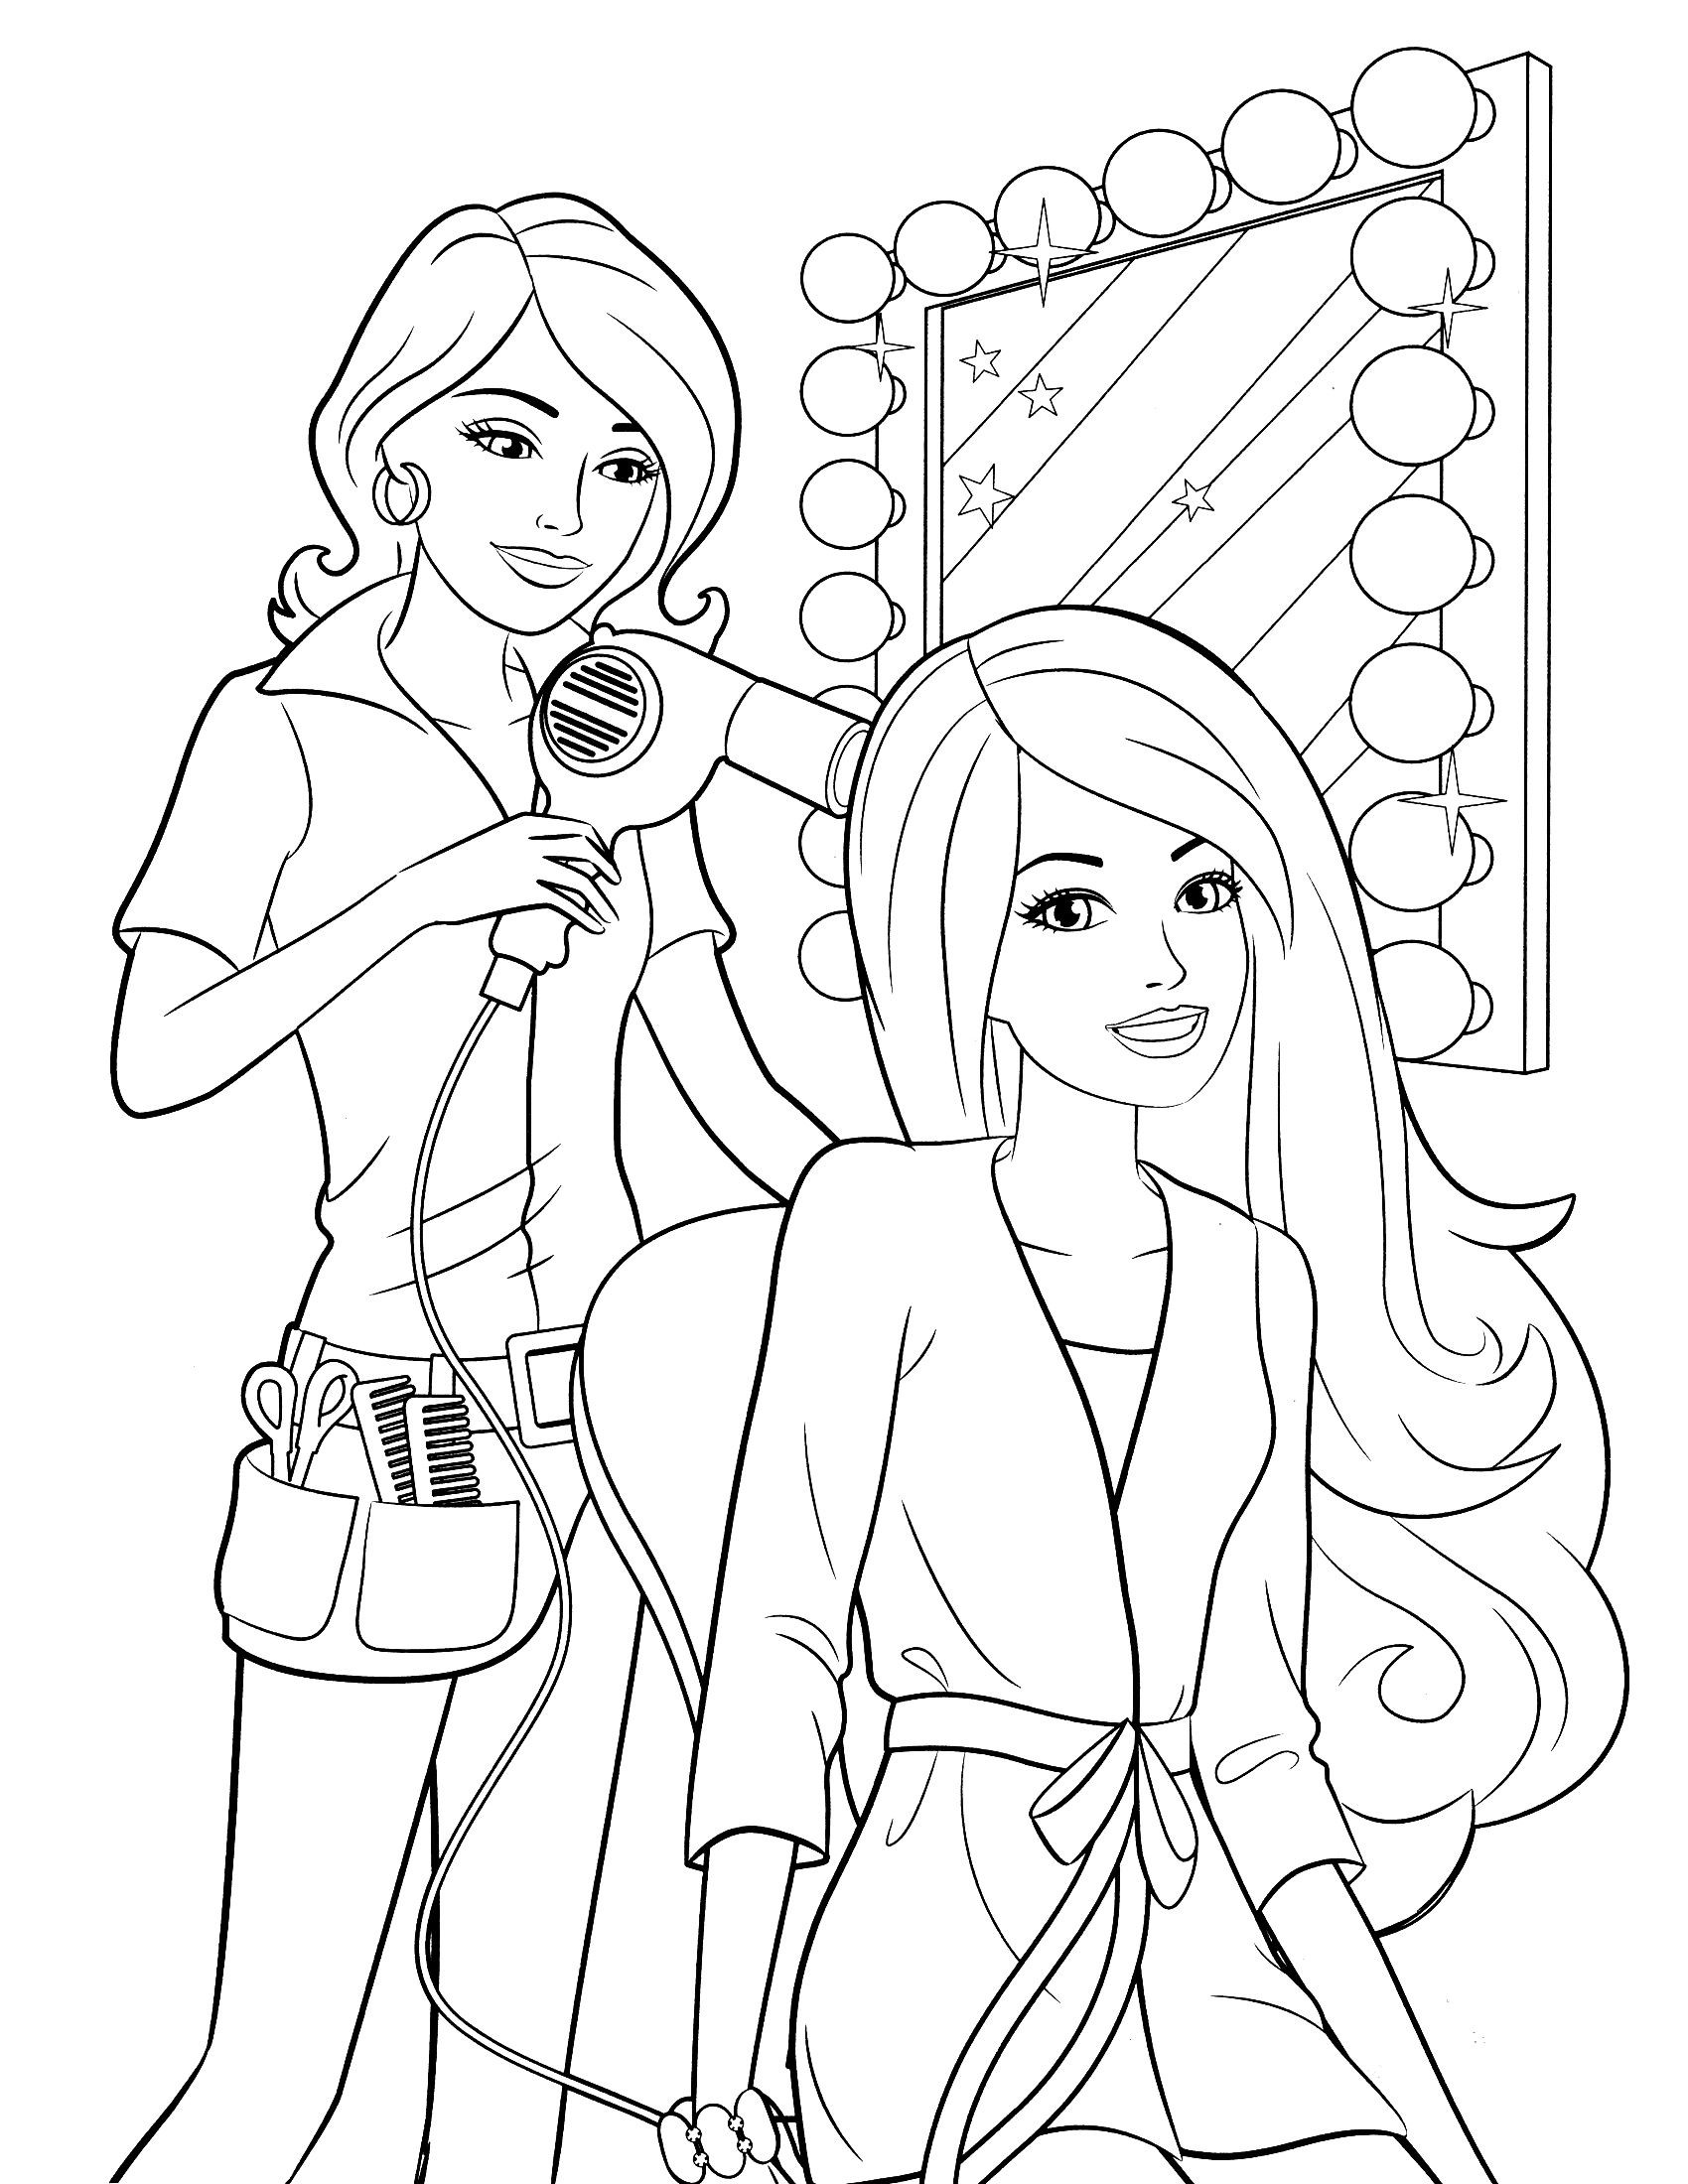 Barbie Coloring Pages For Girls
 The most sold toy in the world since the 1990s Barbie